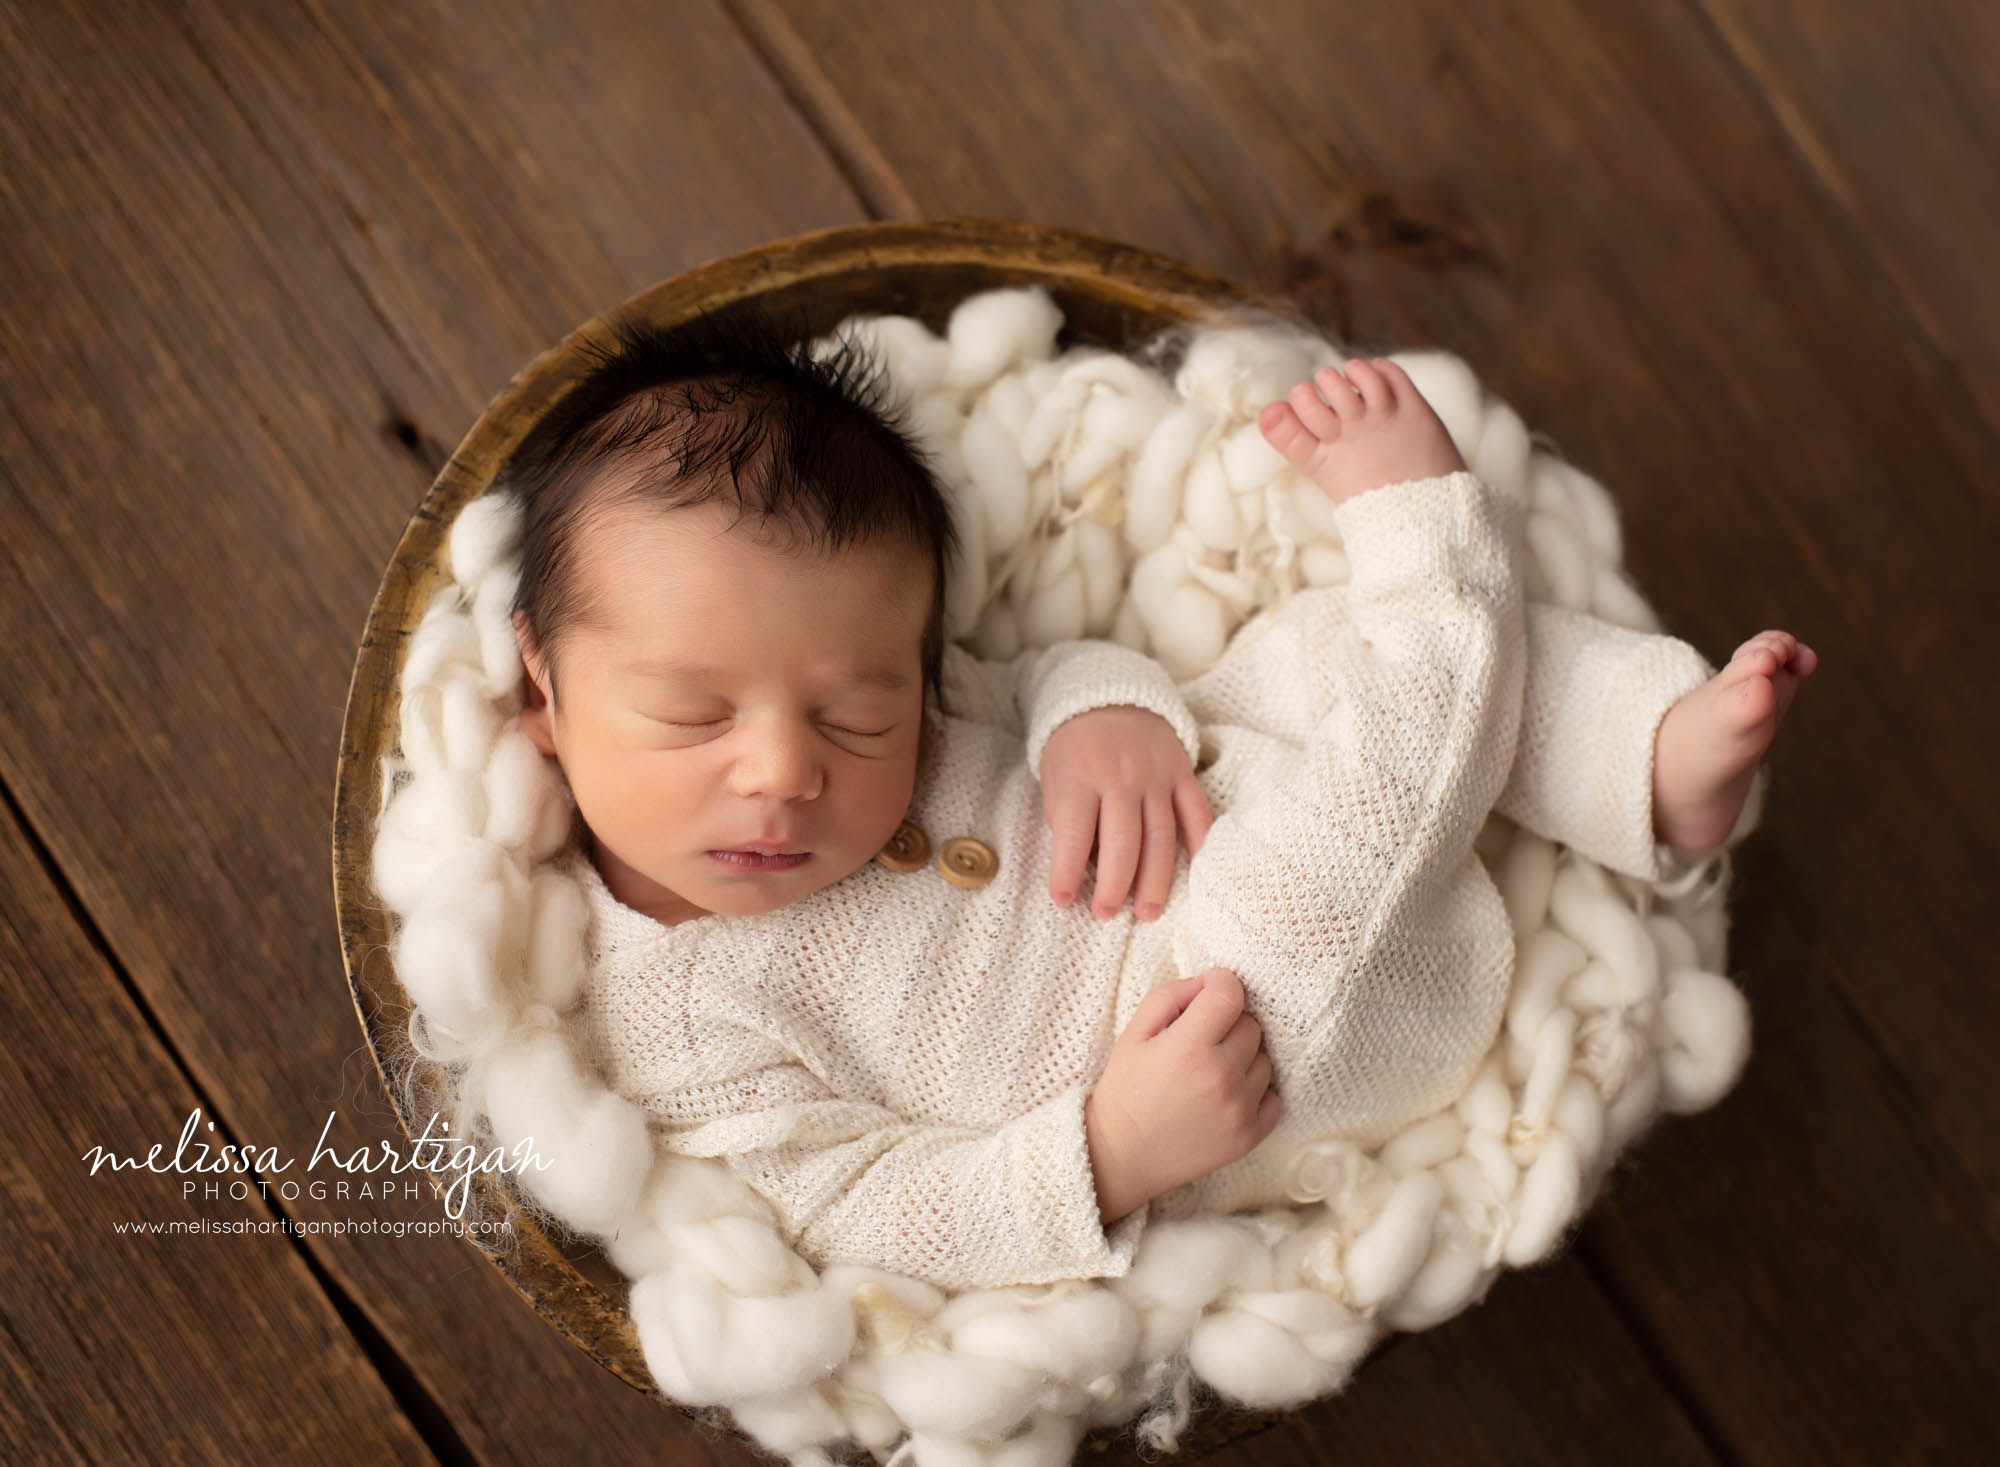 Newborn baby boy wearing newborn outfit posed curly in wooden bowl